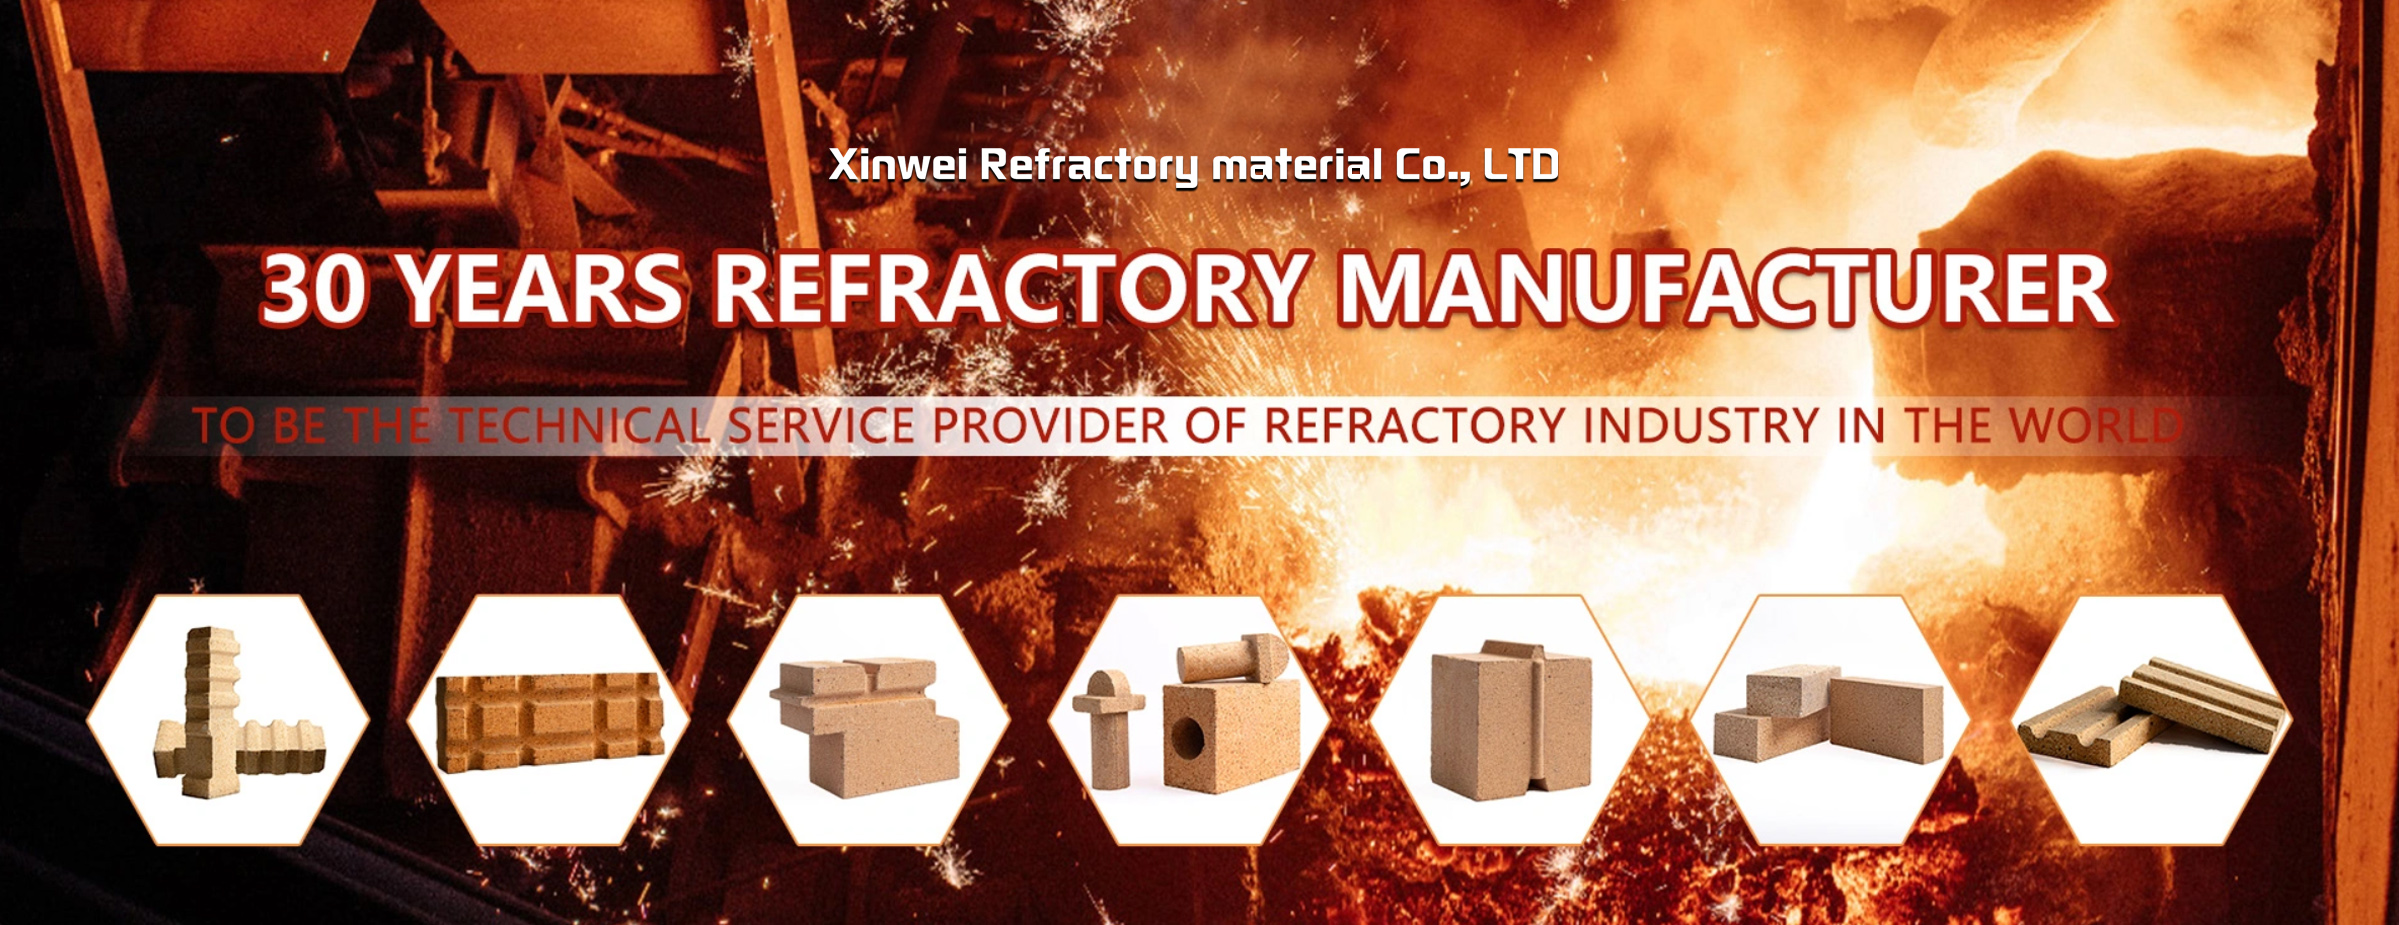 30 years refractory manufacturer, quality service is our mission!